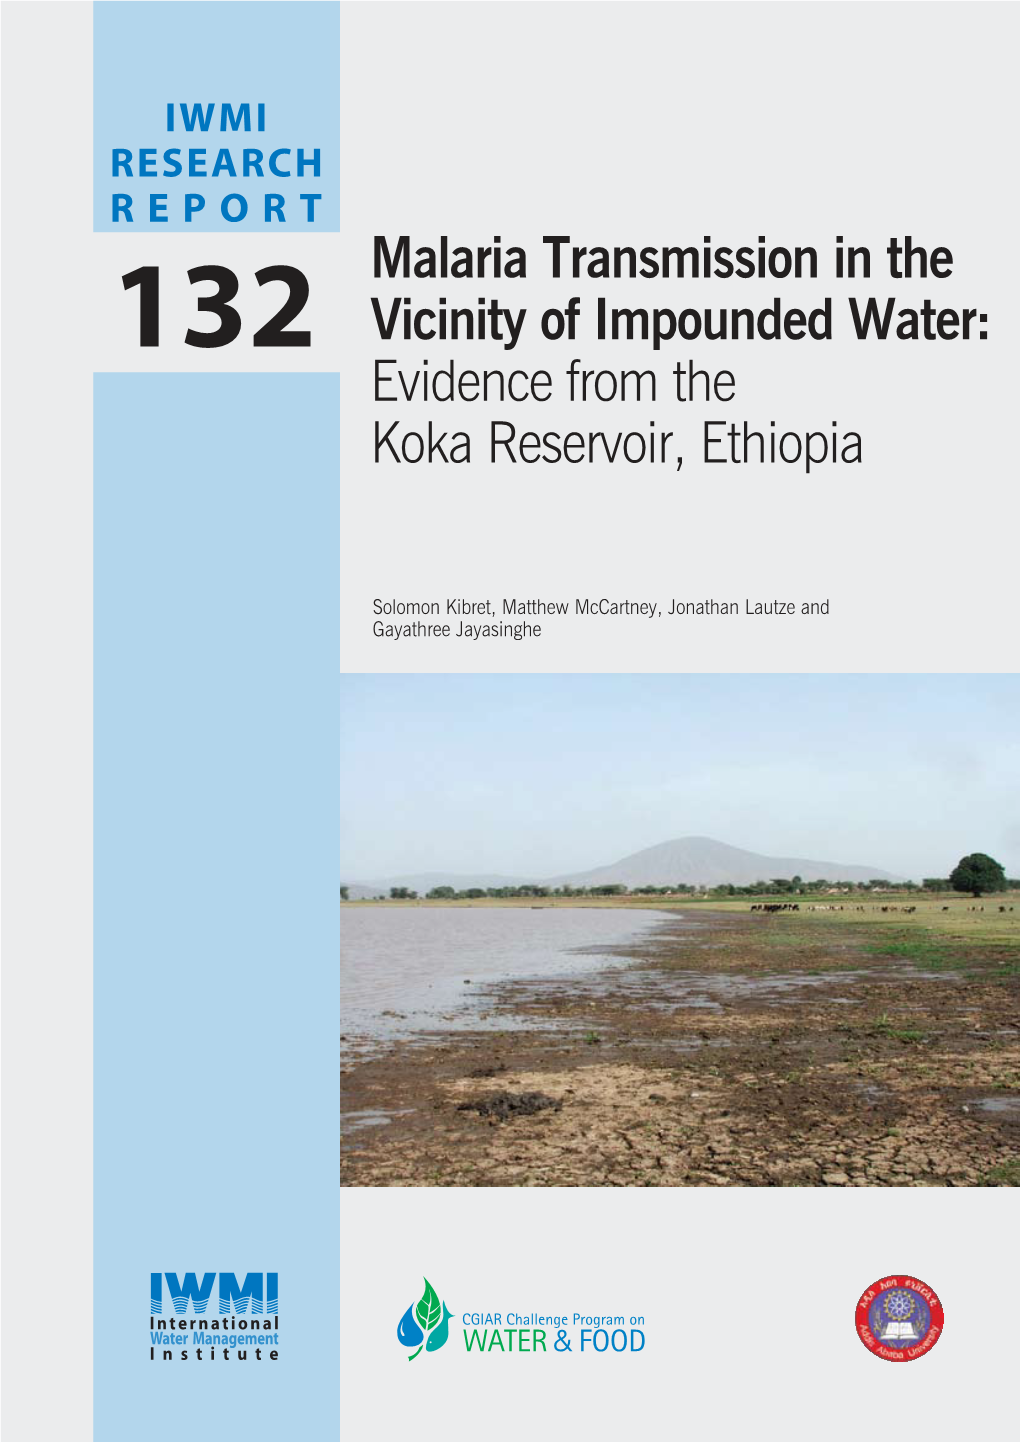 Malaria Transmission in the Vicinity of Impounded Water: Evidence from the Koka Reservoir, Ethiopia